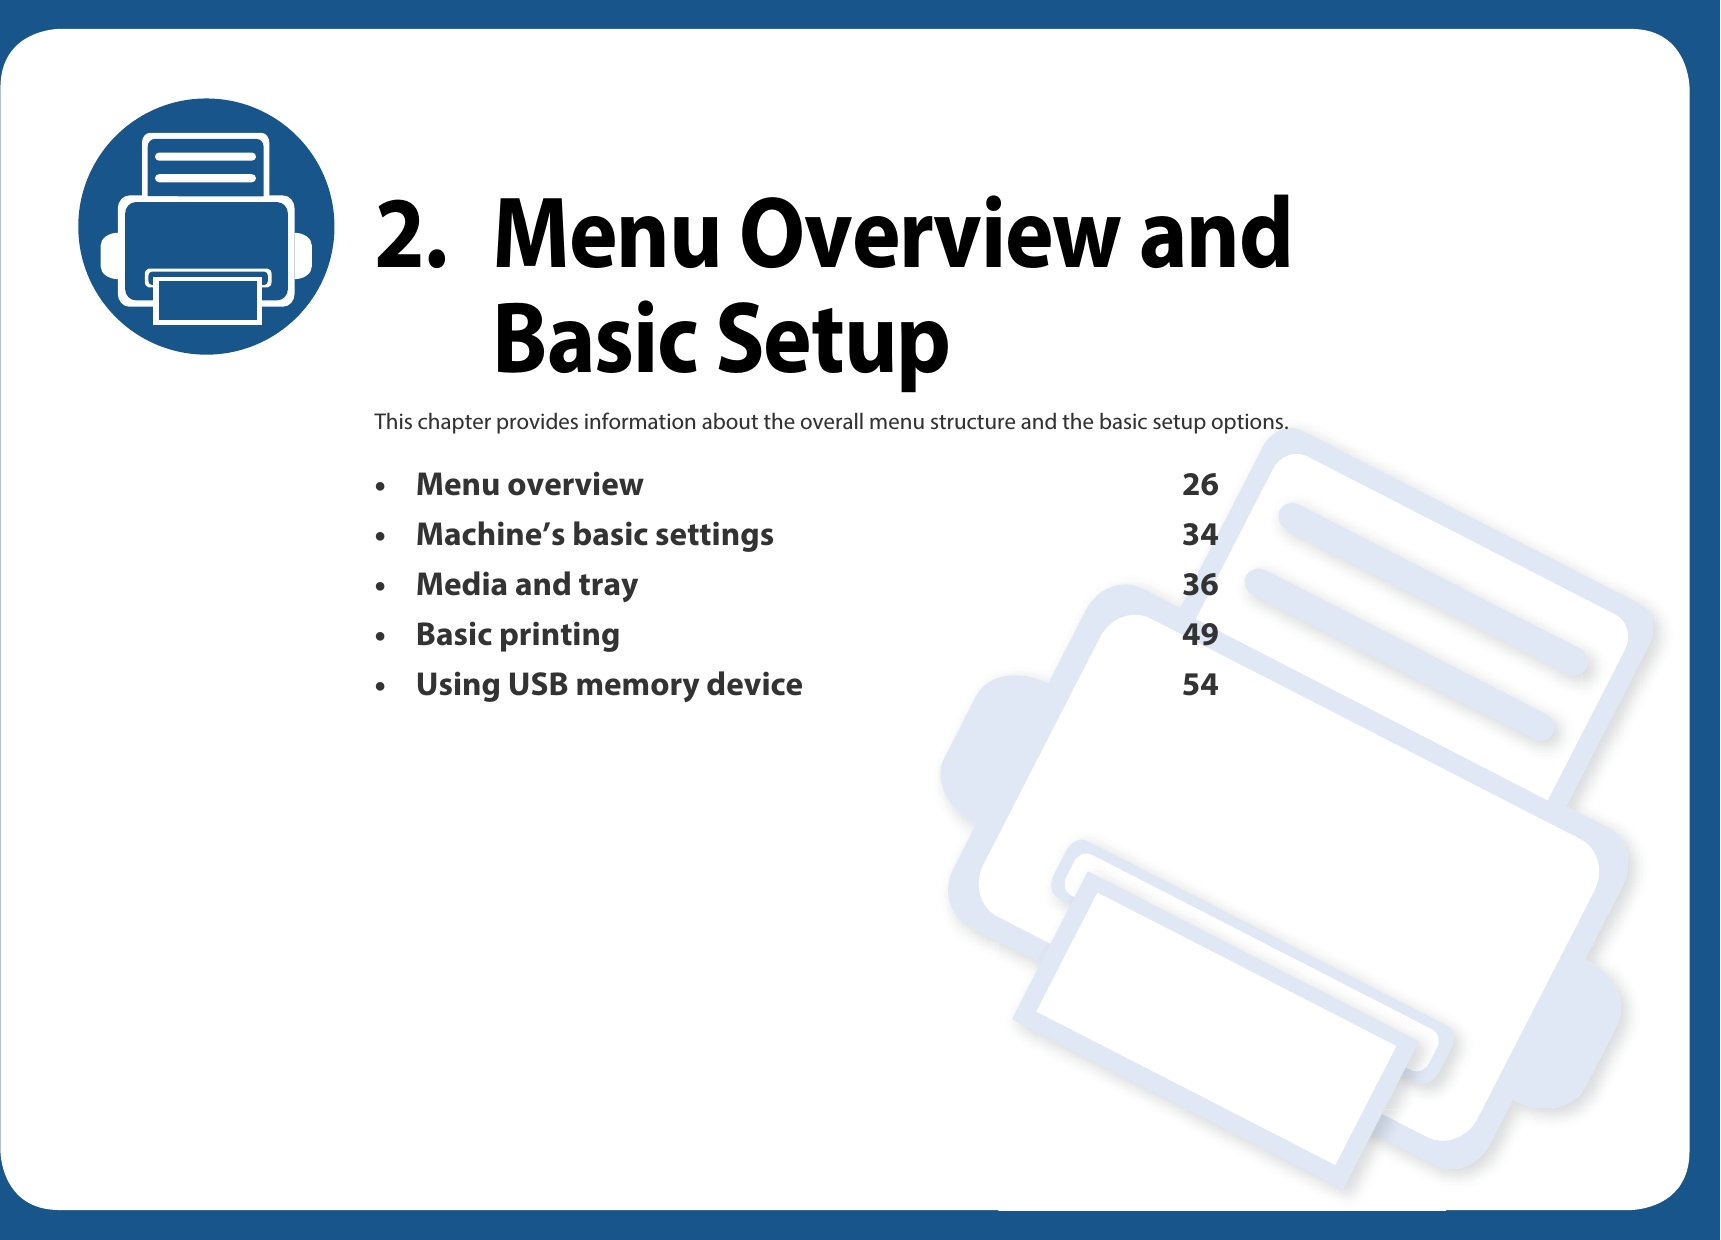 2. Menu Overview and Basic SetupThis chapter provides information about the overall menu structure and the basic setup options.• Menu overview 26• Machine’s basic settings 34• Media and tray 36• Basic printing 49• Using USB memory device 54